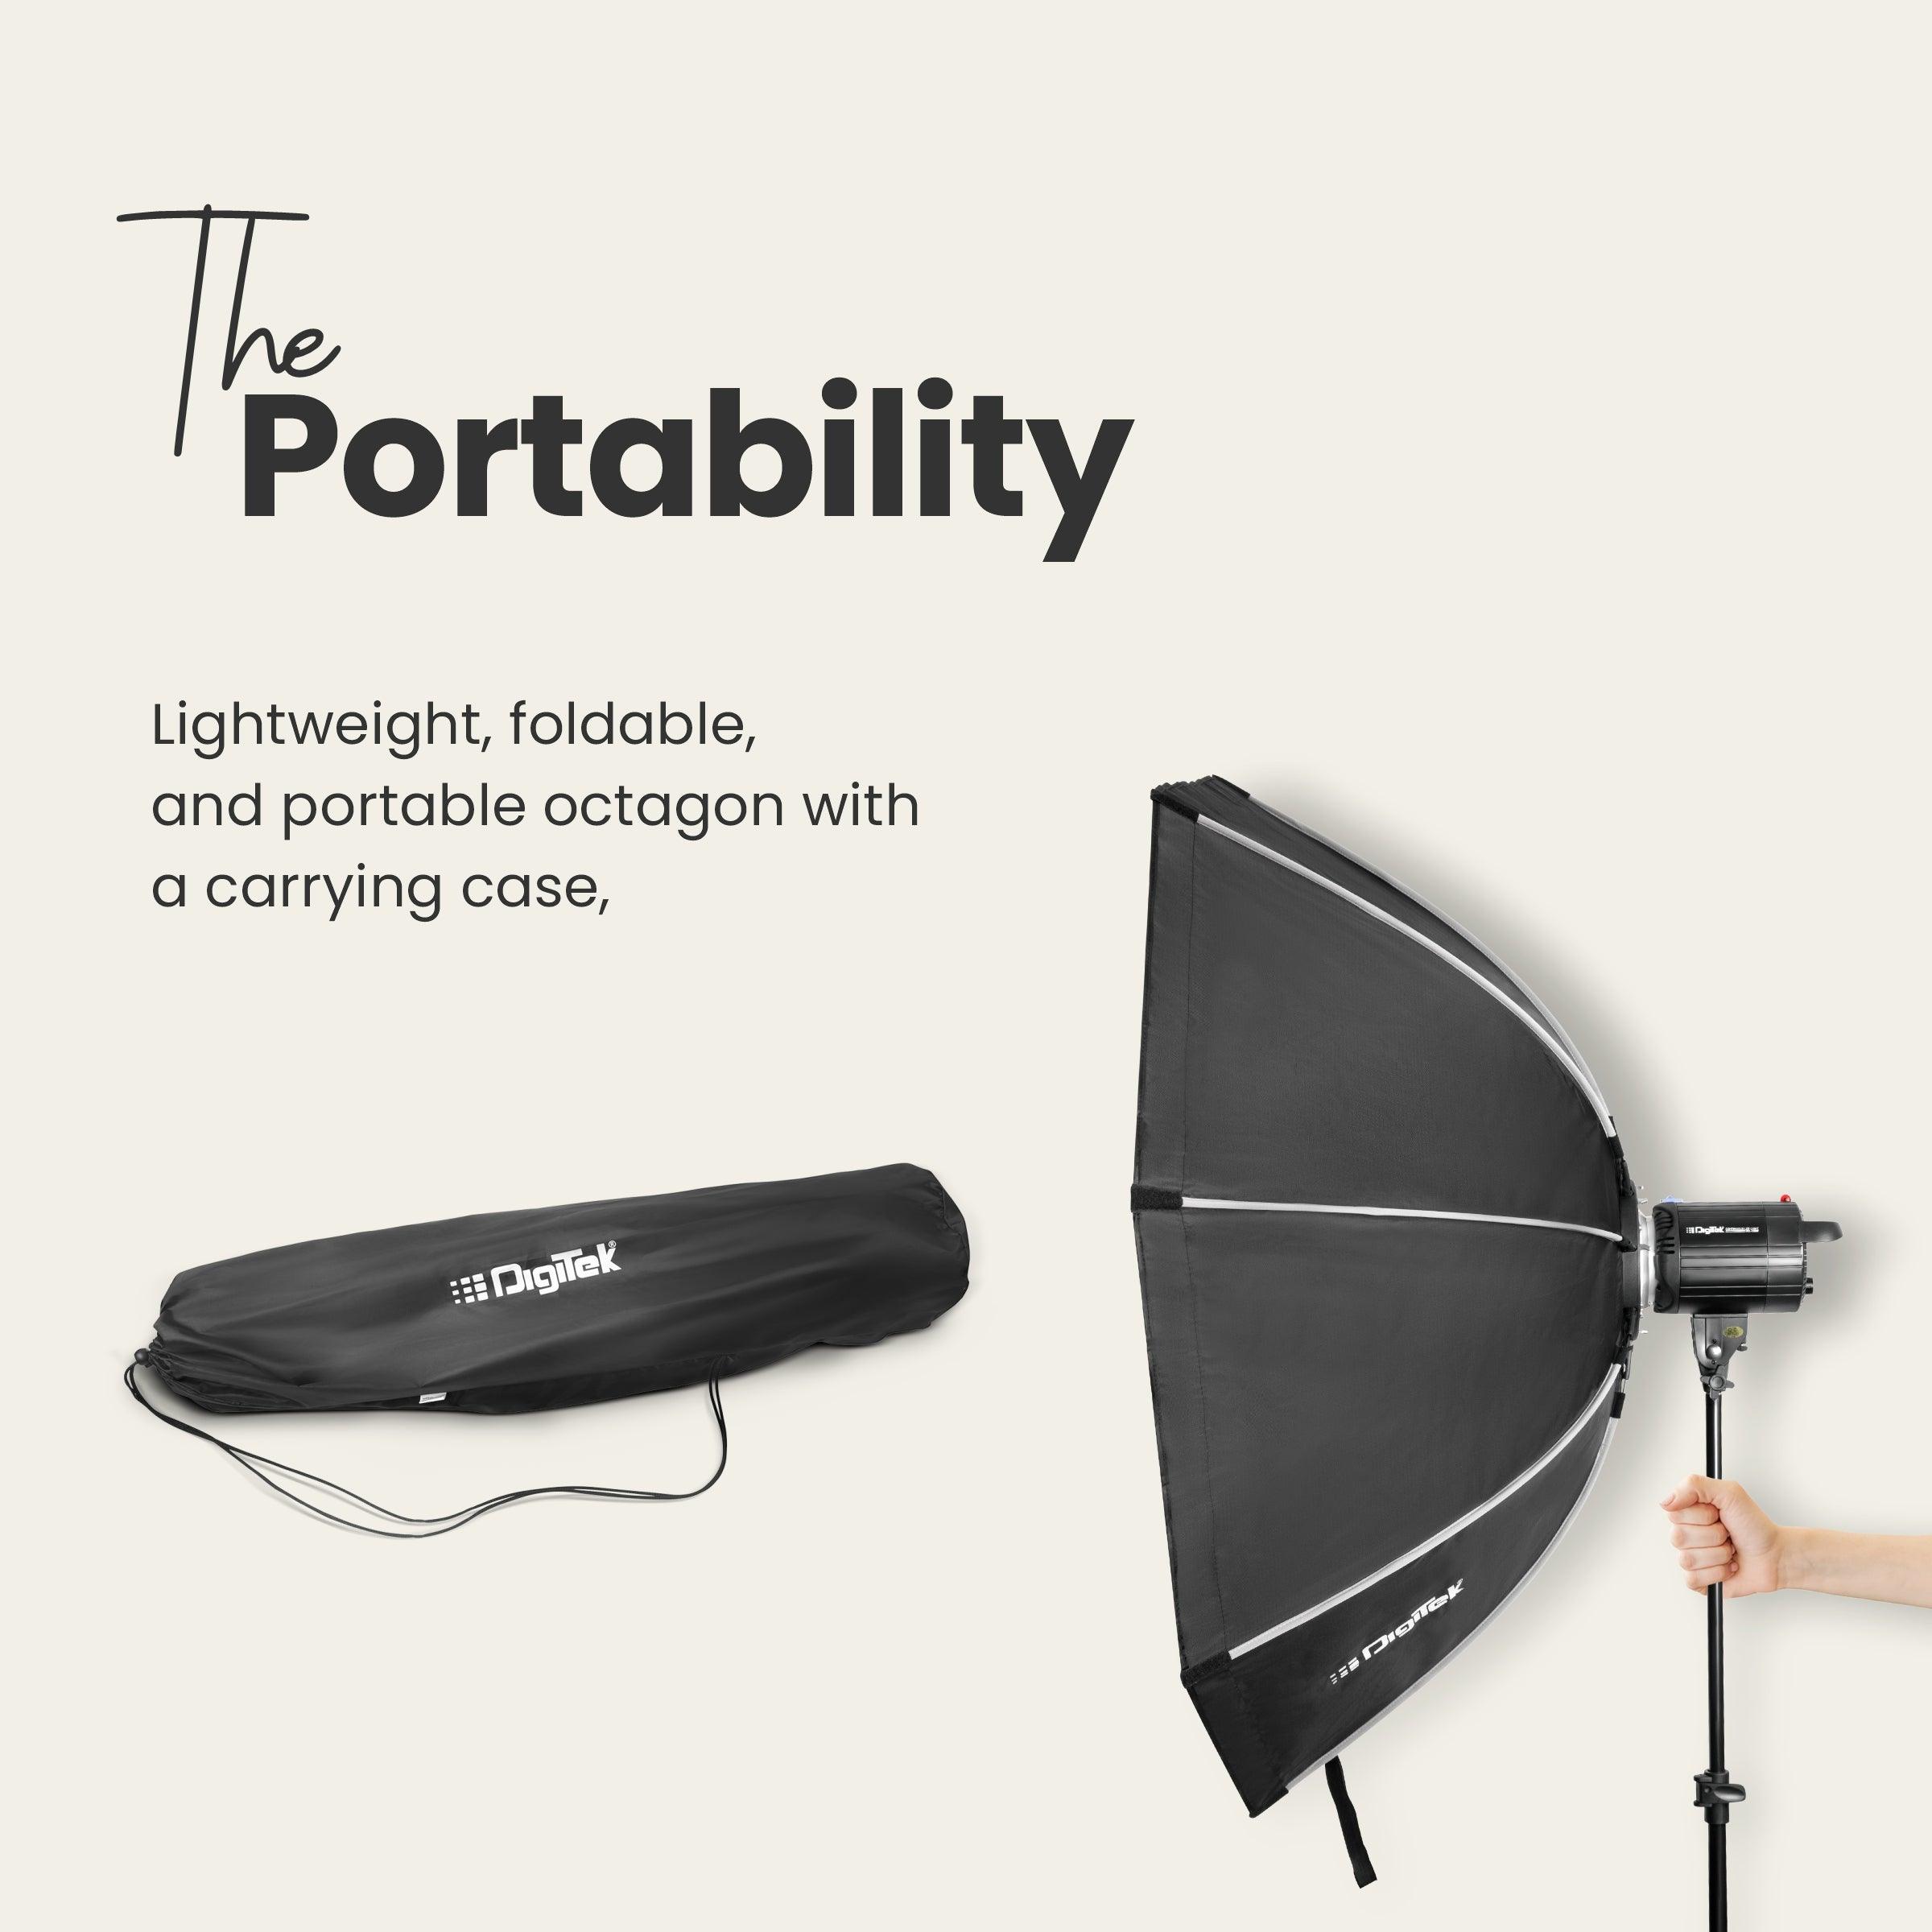 Digitek (DSBH-065) (65cm) Lightweight & Portable Soft Box Comes with S2 Type Bracket & 2 Diffuser Sheets | Carrying Case | Compatible with All Flash Speedlights - Digitek